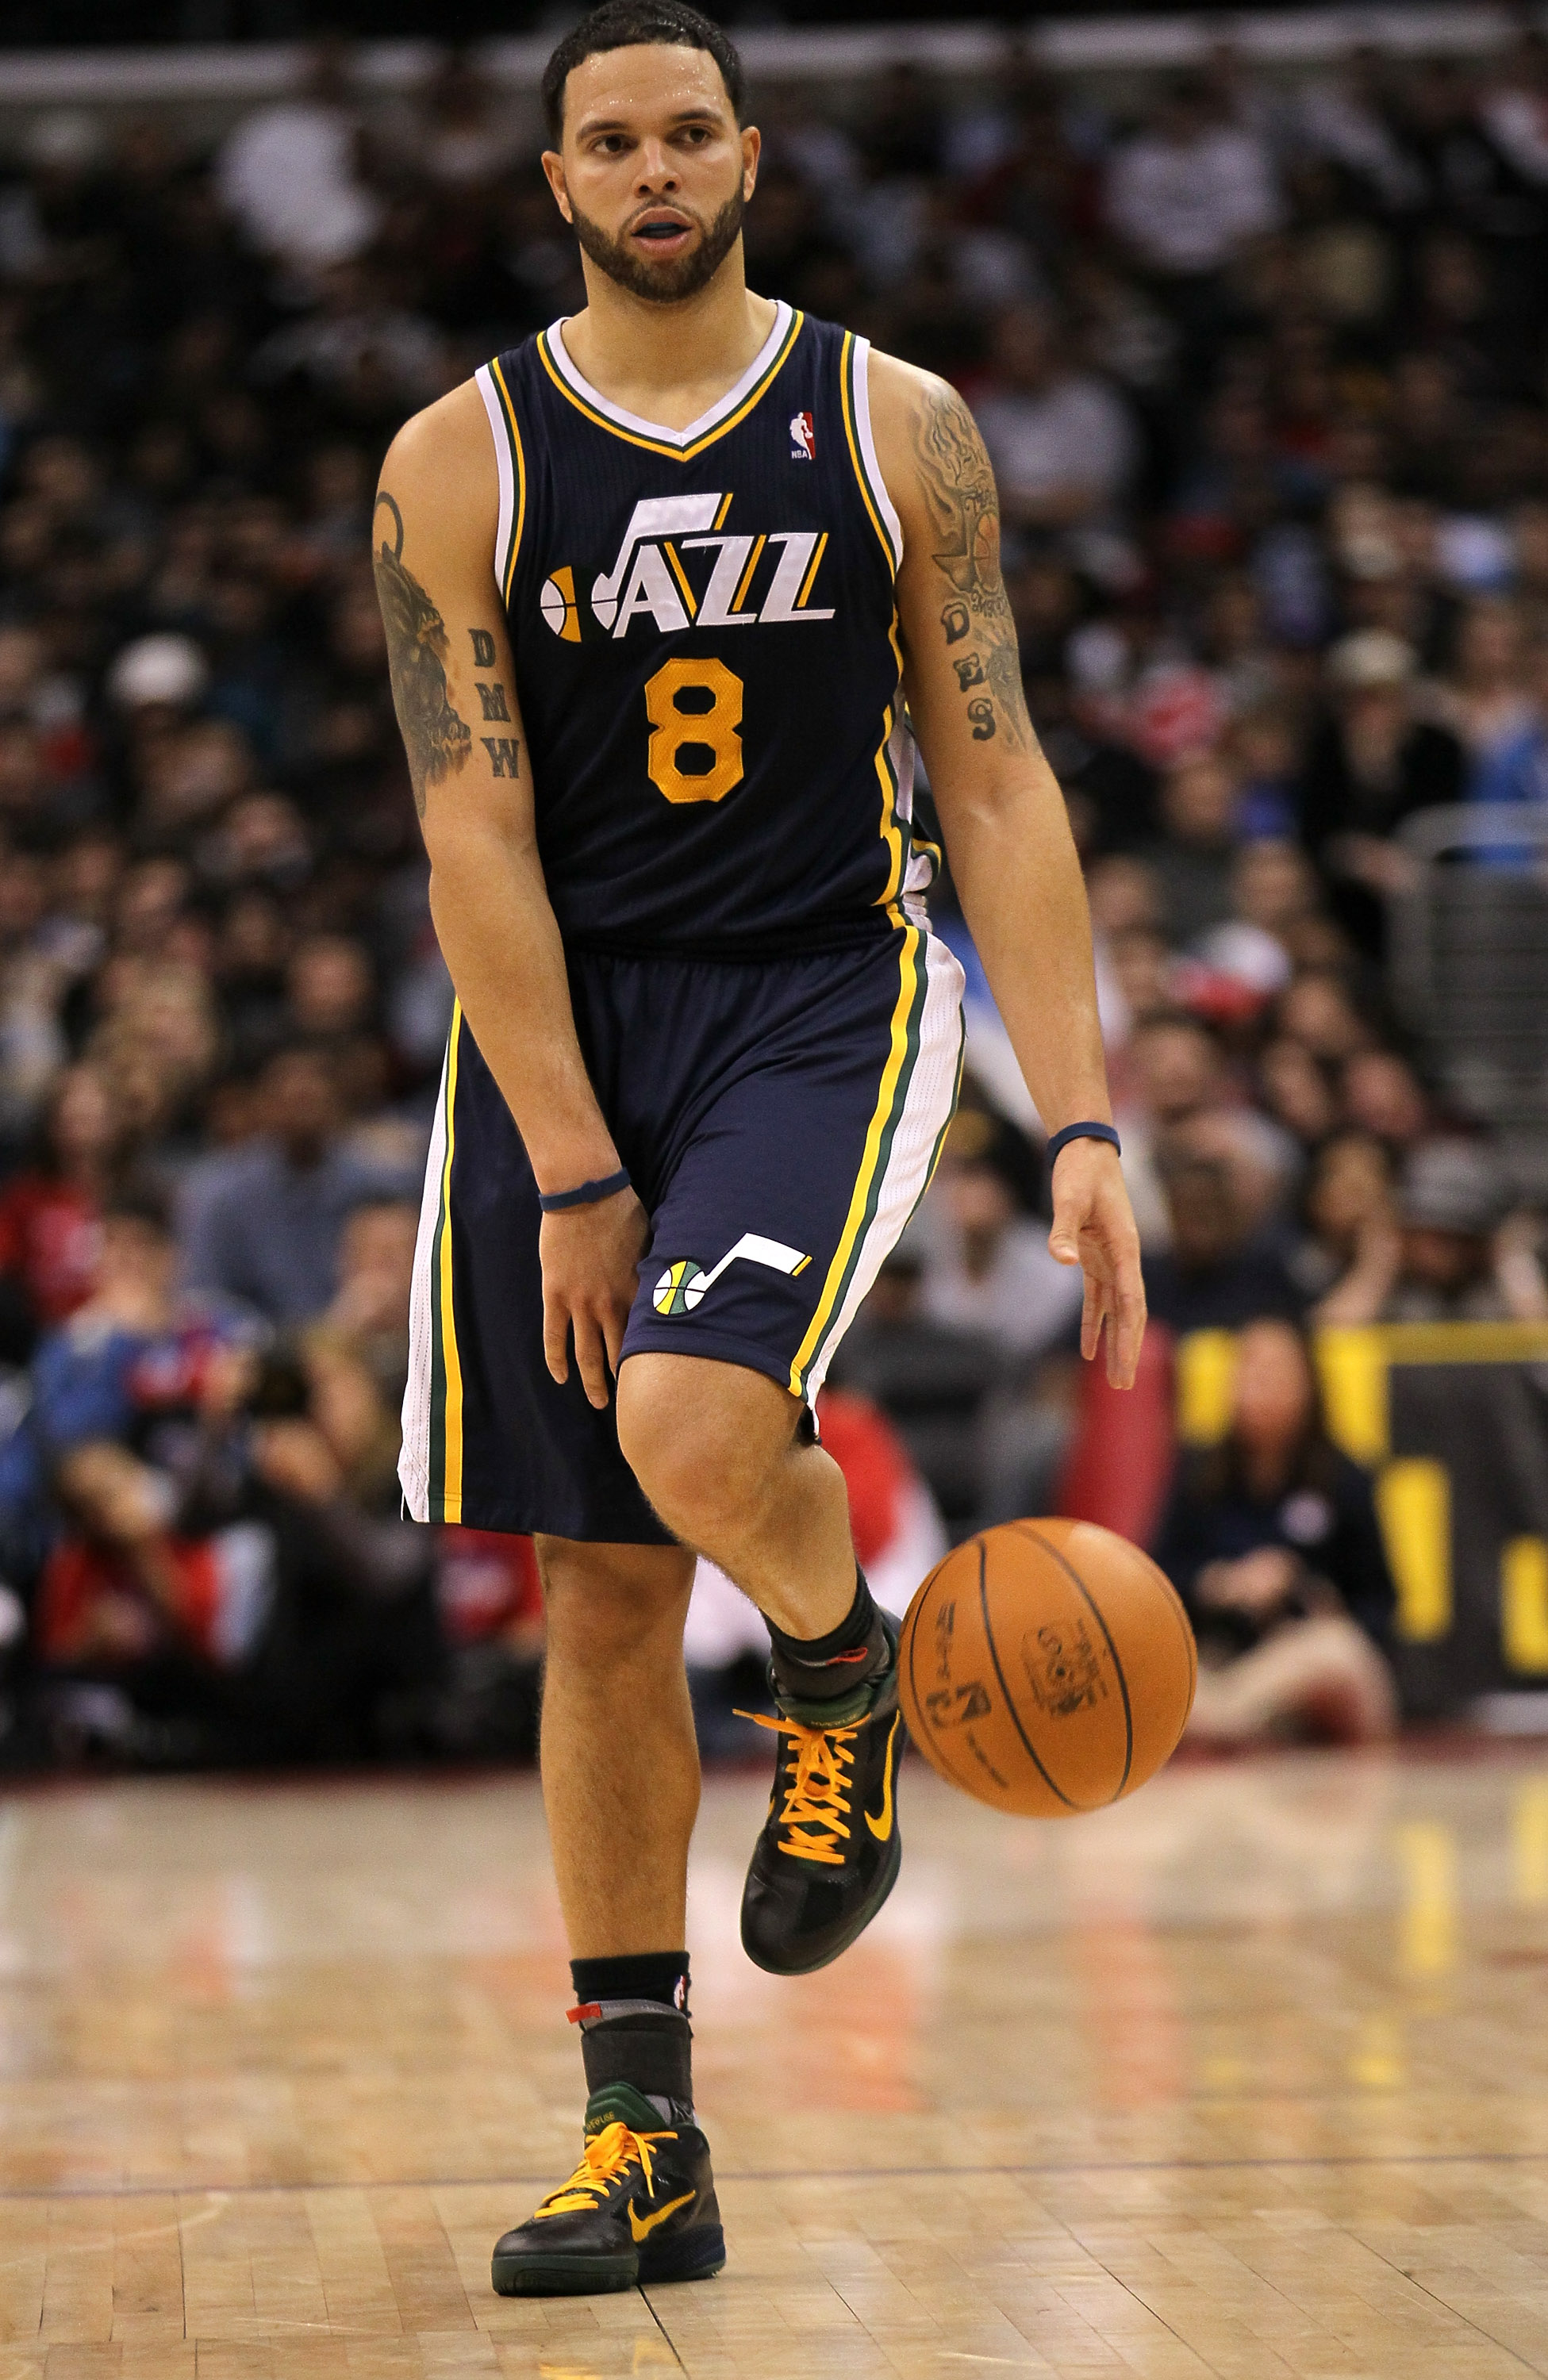 LOS ANGELES, CA - DECEMBER 29:  Deron Williams #8 of the Utah Jazz controls the ball against the Los Angeles Clippers at Staples Center on December 29, 2010 in Los Angeles, California.   The Jazz won 103-85.  NOTE TO USER: User expressly acknowledges and 